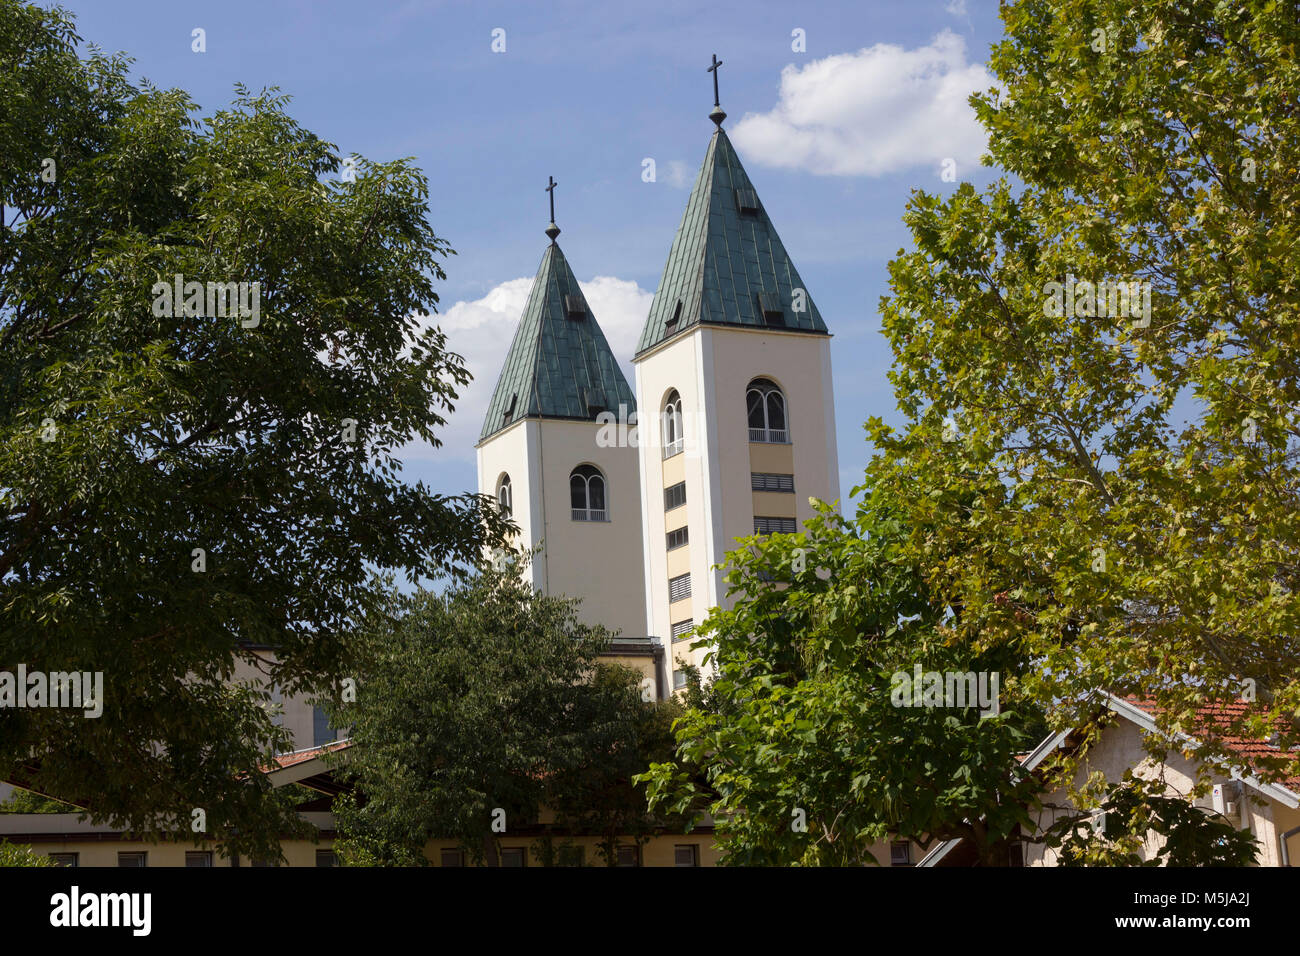 MEDJUGORJE - BOSNIA AND HERZEGOVINA - AUGUST 16 2017: Saint James belfries in Medjugorje, surrounded by nature in summer season Stock Photo